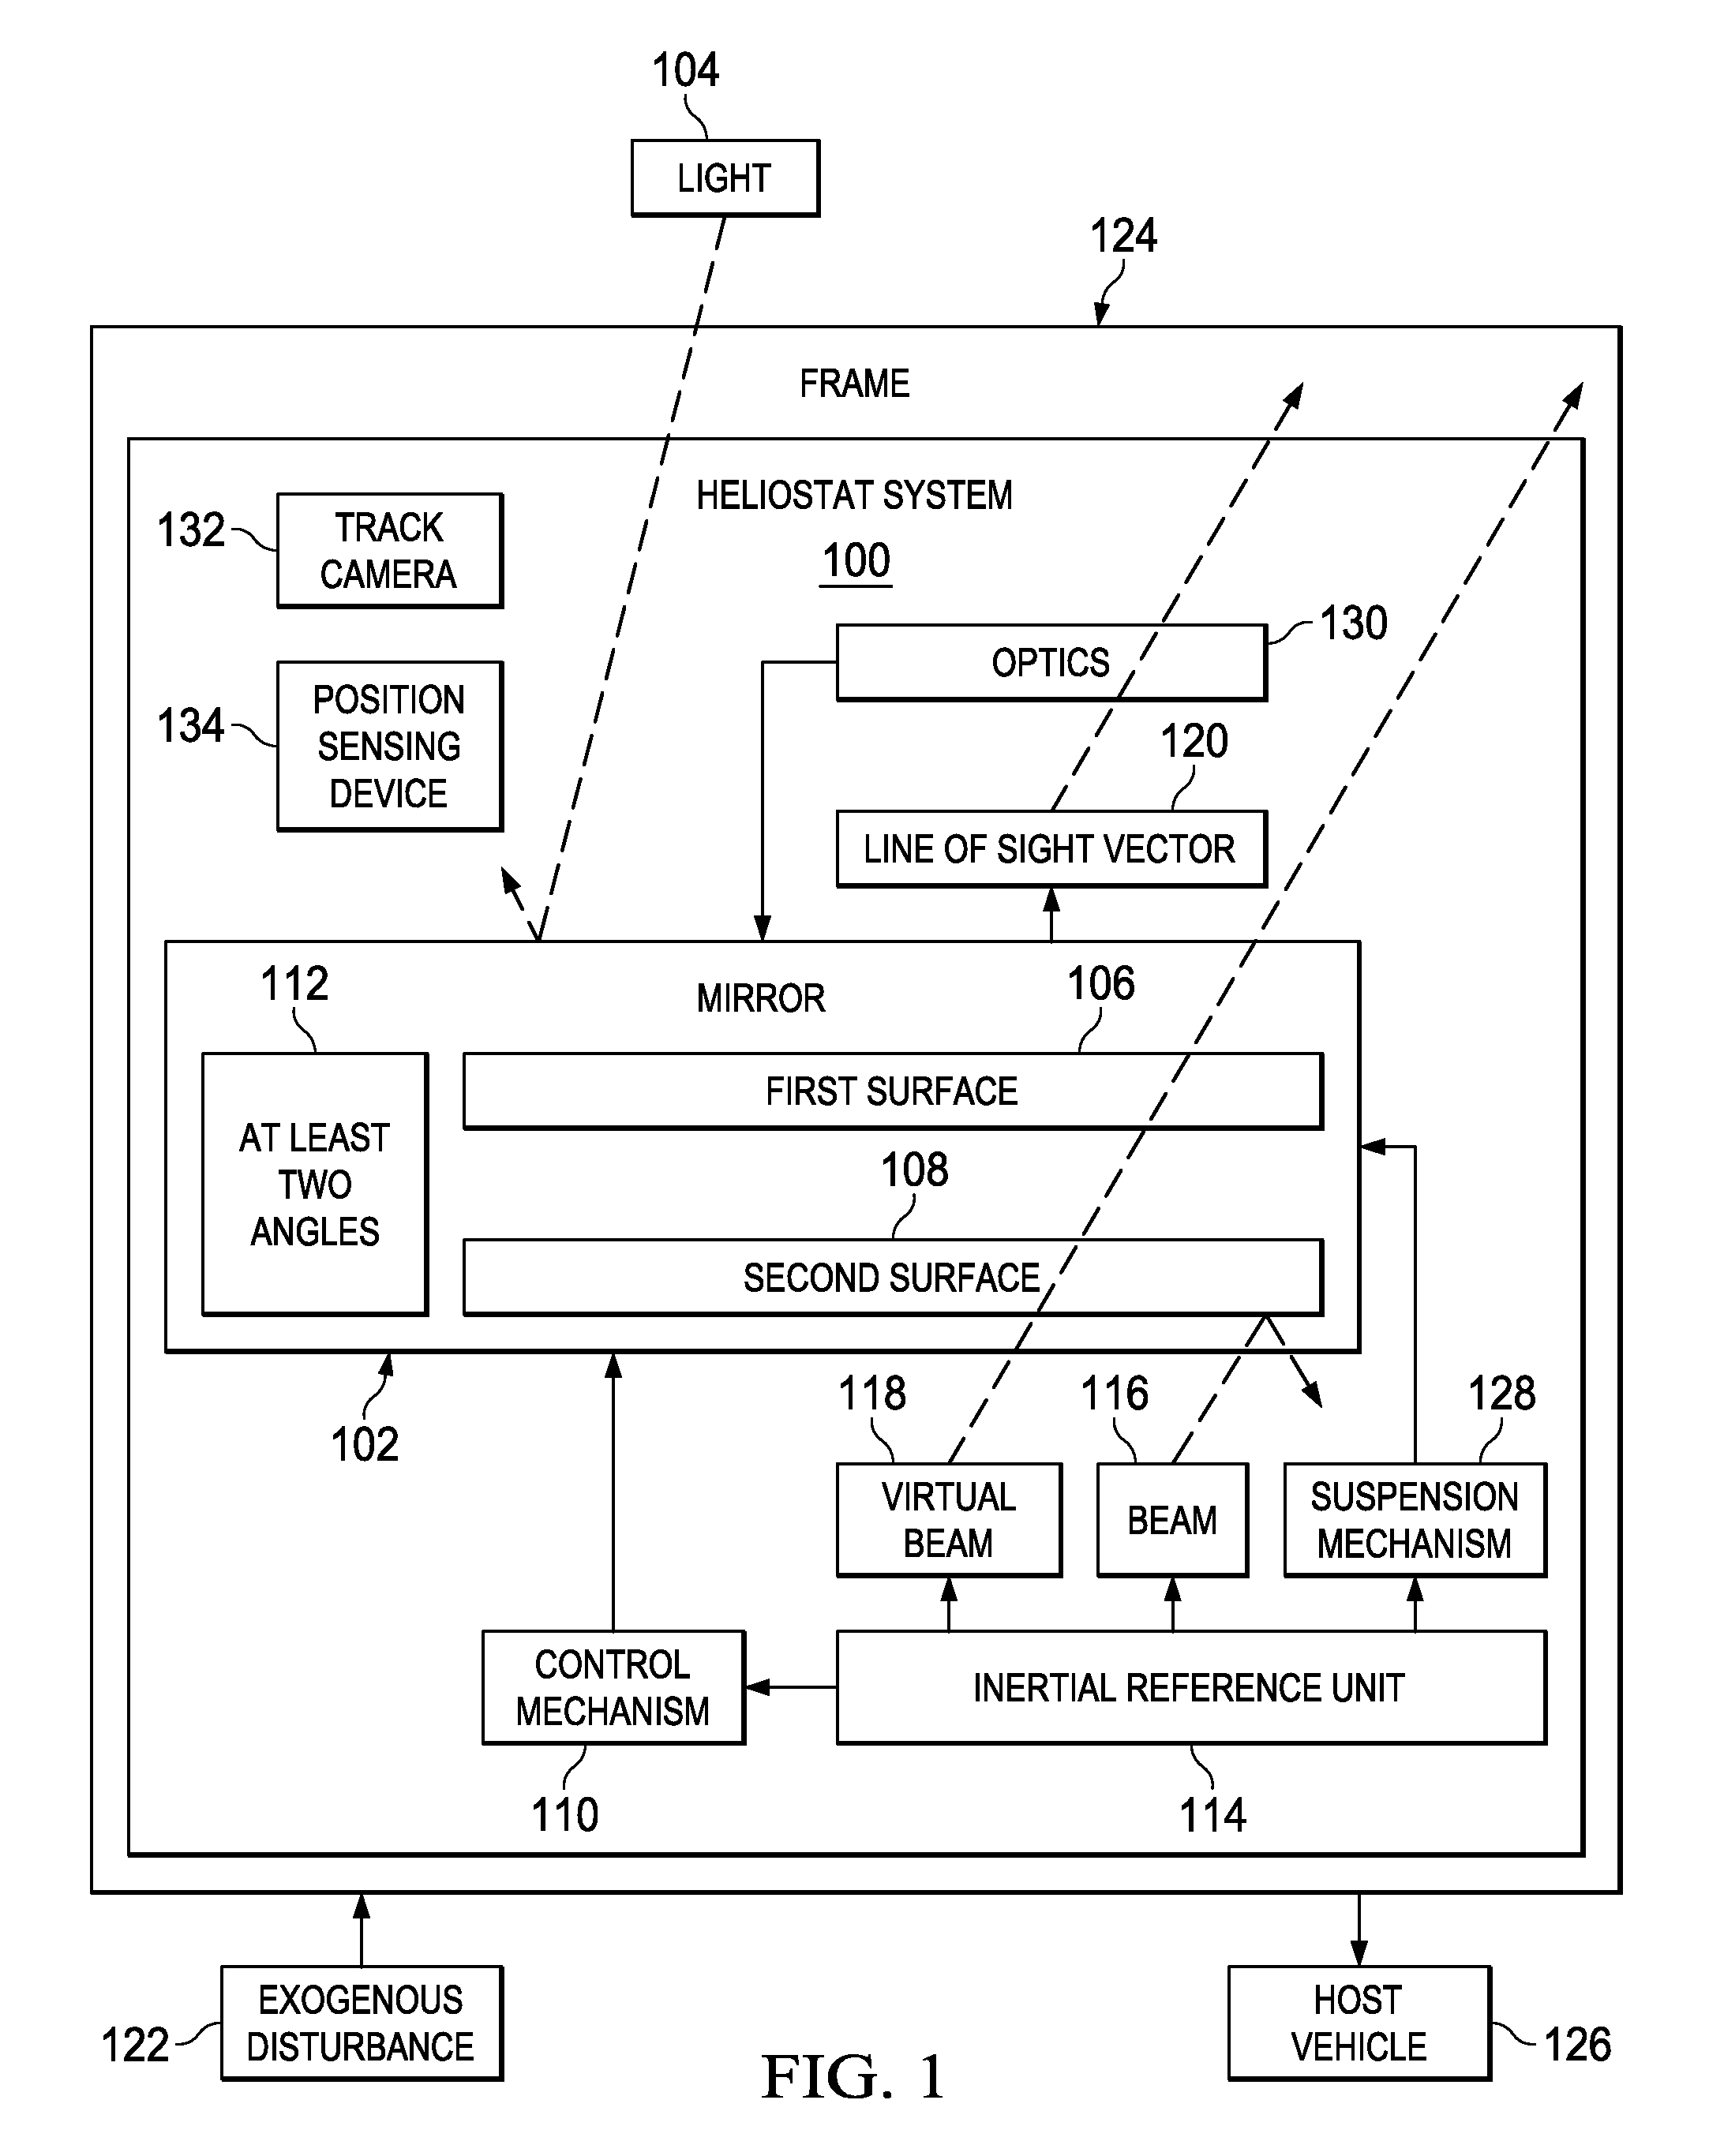 Stabilization of a heliostat output mirror using an inertial reference beam